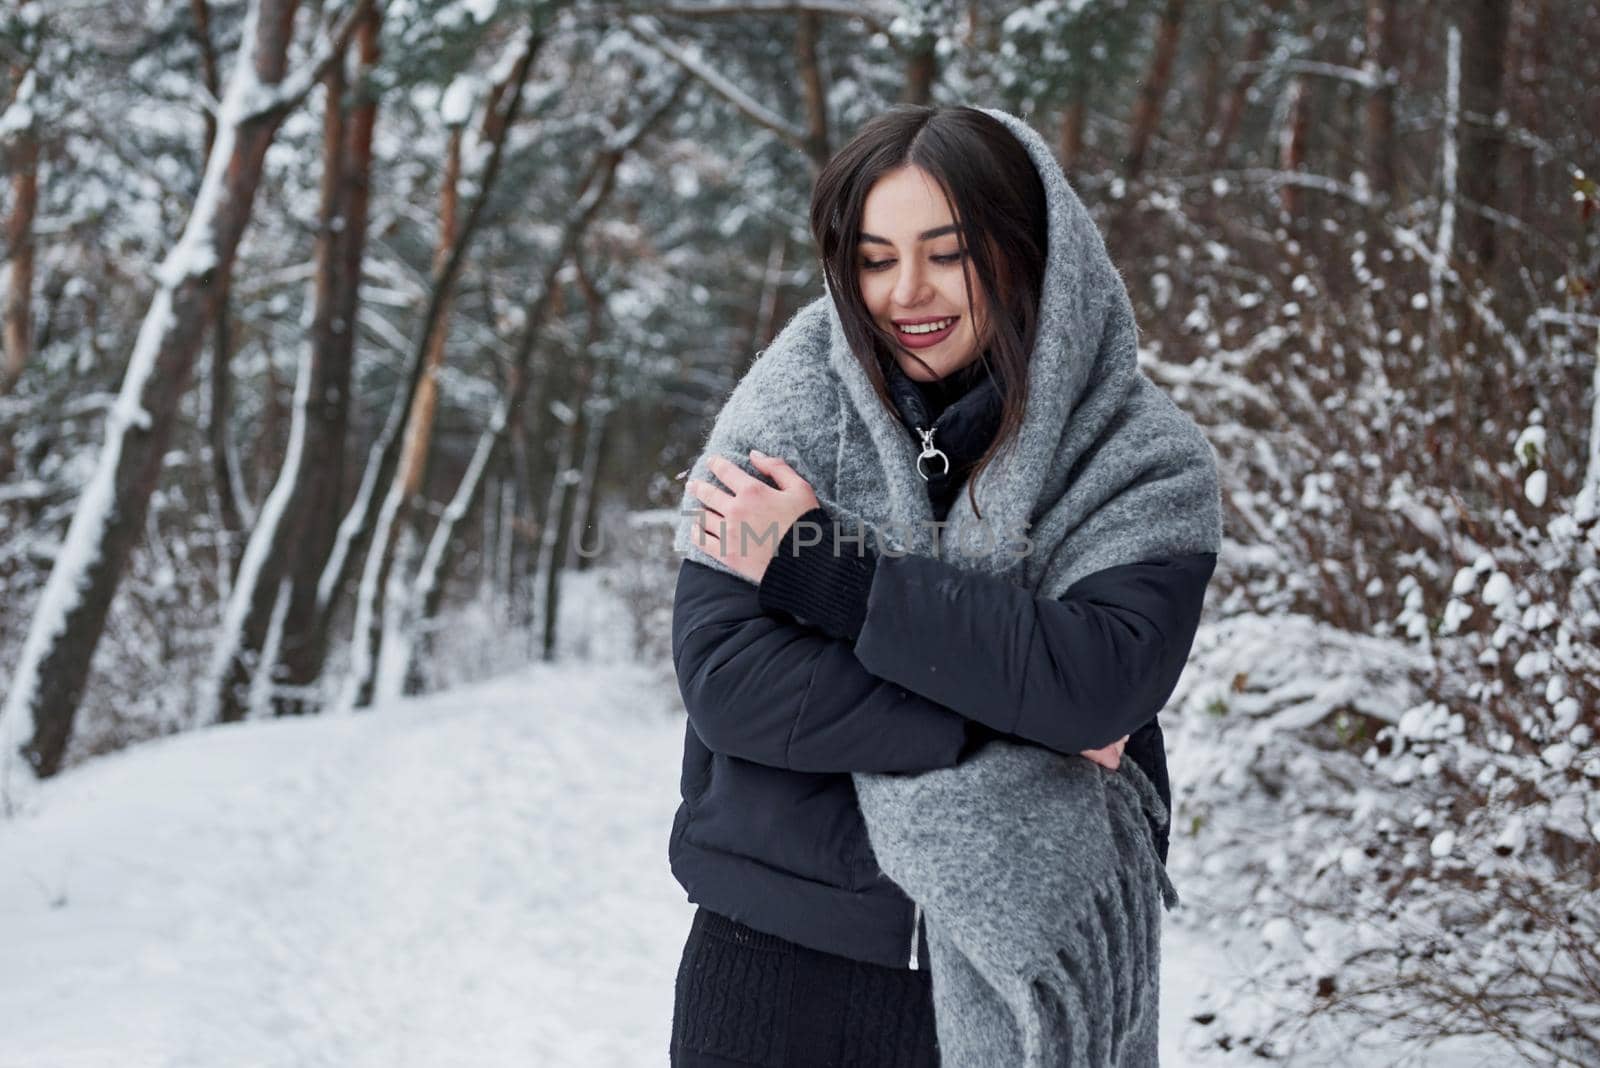 Warming with some good clothes. Portrait of charming woman in the black jacket and grey scarf in the winter forest.